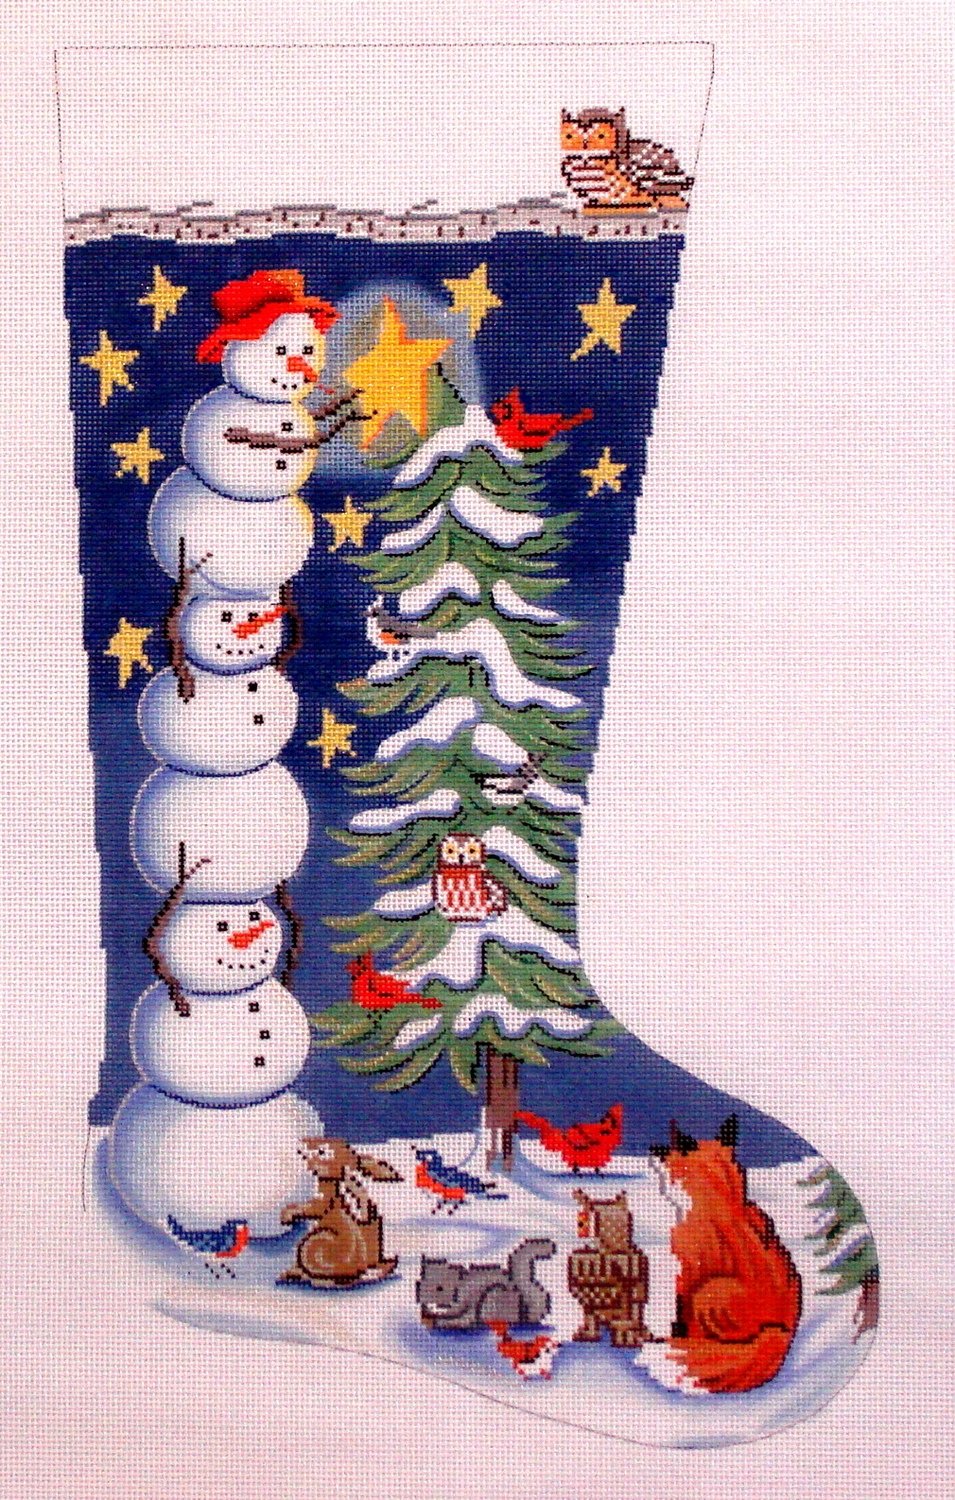 Tree Trimming Snowmen Stocking   (Handpainted by Alice Peterson)*Product may take longer than usual to arrive*